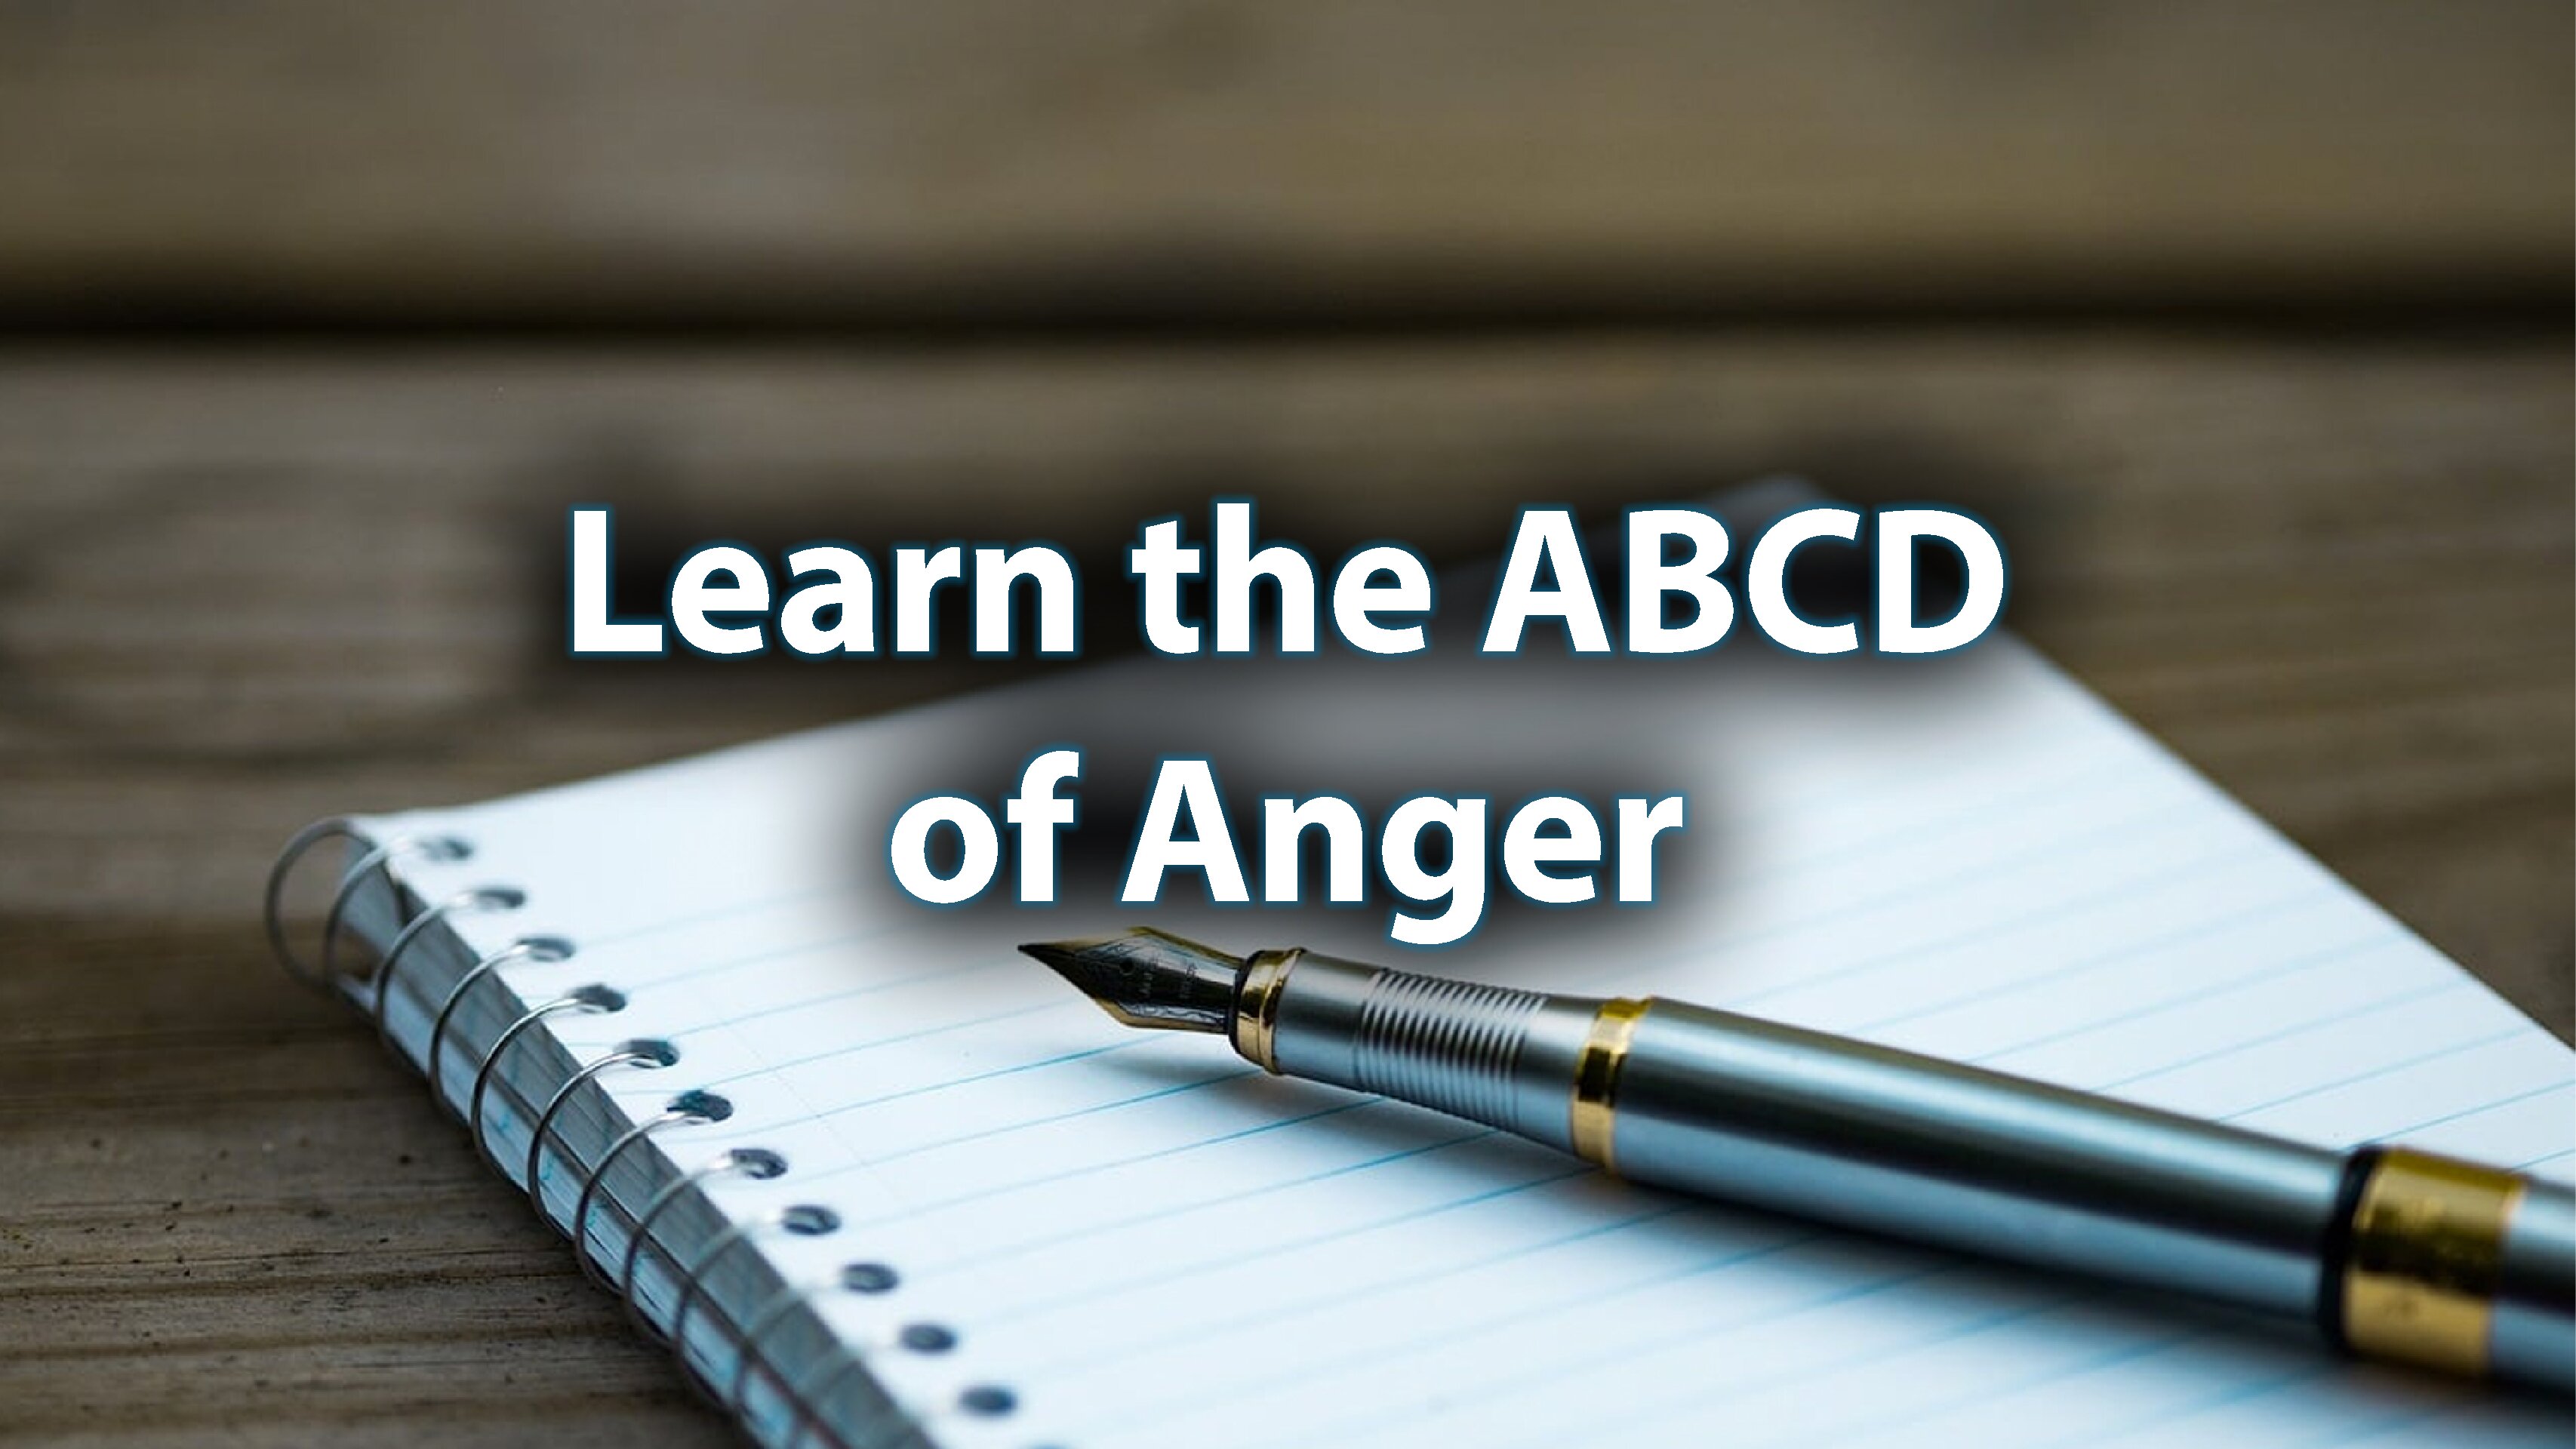 Day 17: Learn the ABCD of Anger